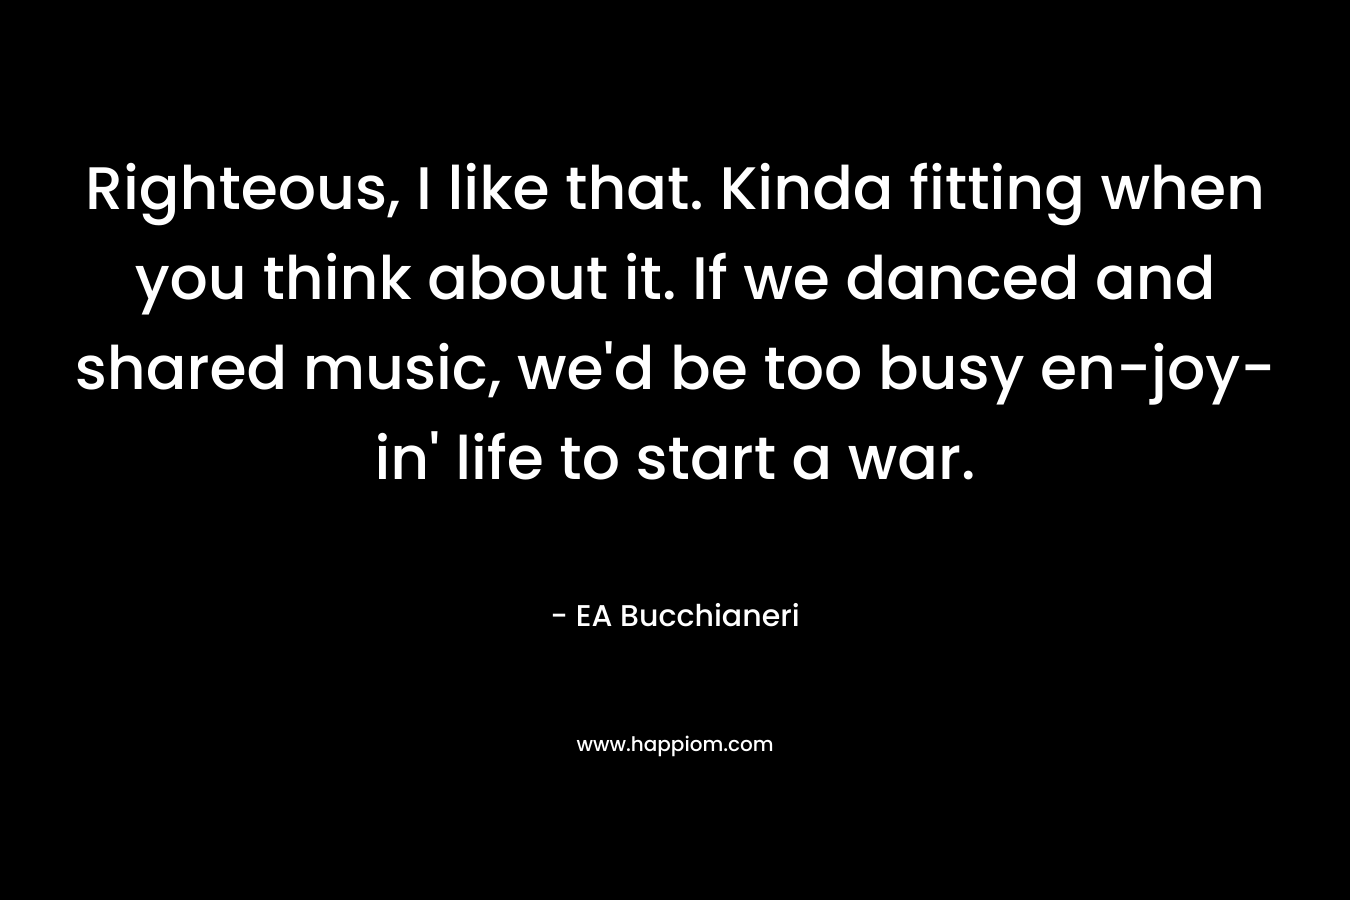 Righteous, I like that. Kinda fitting when you think about it. If we danced and shared music, we’d be too busy en-joy-in’ life to start a war. – EA Bucchianeri